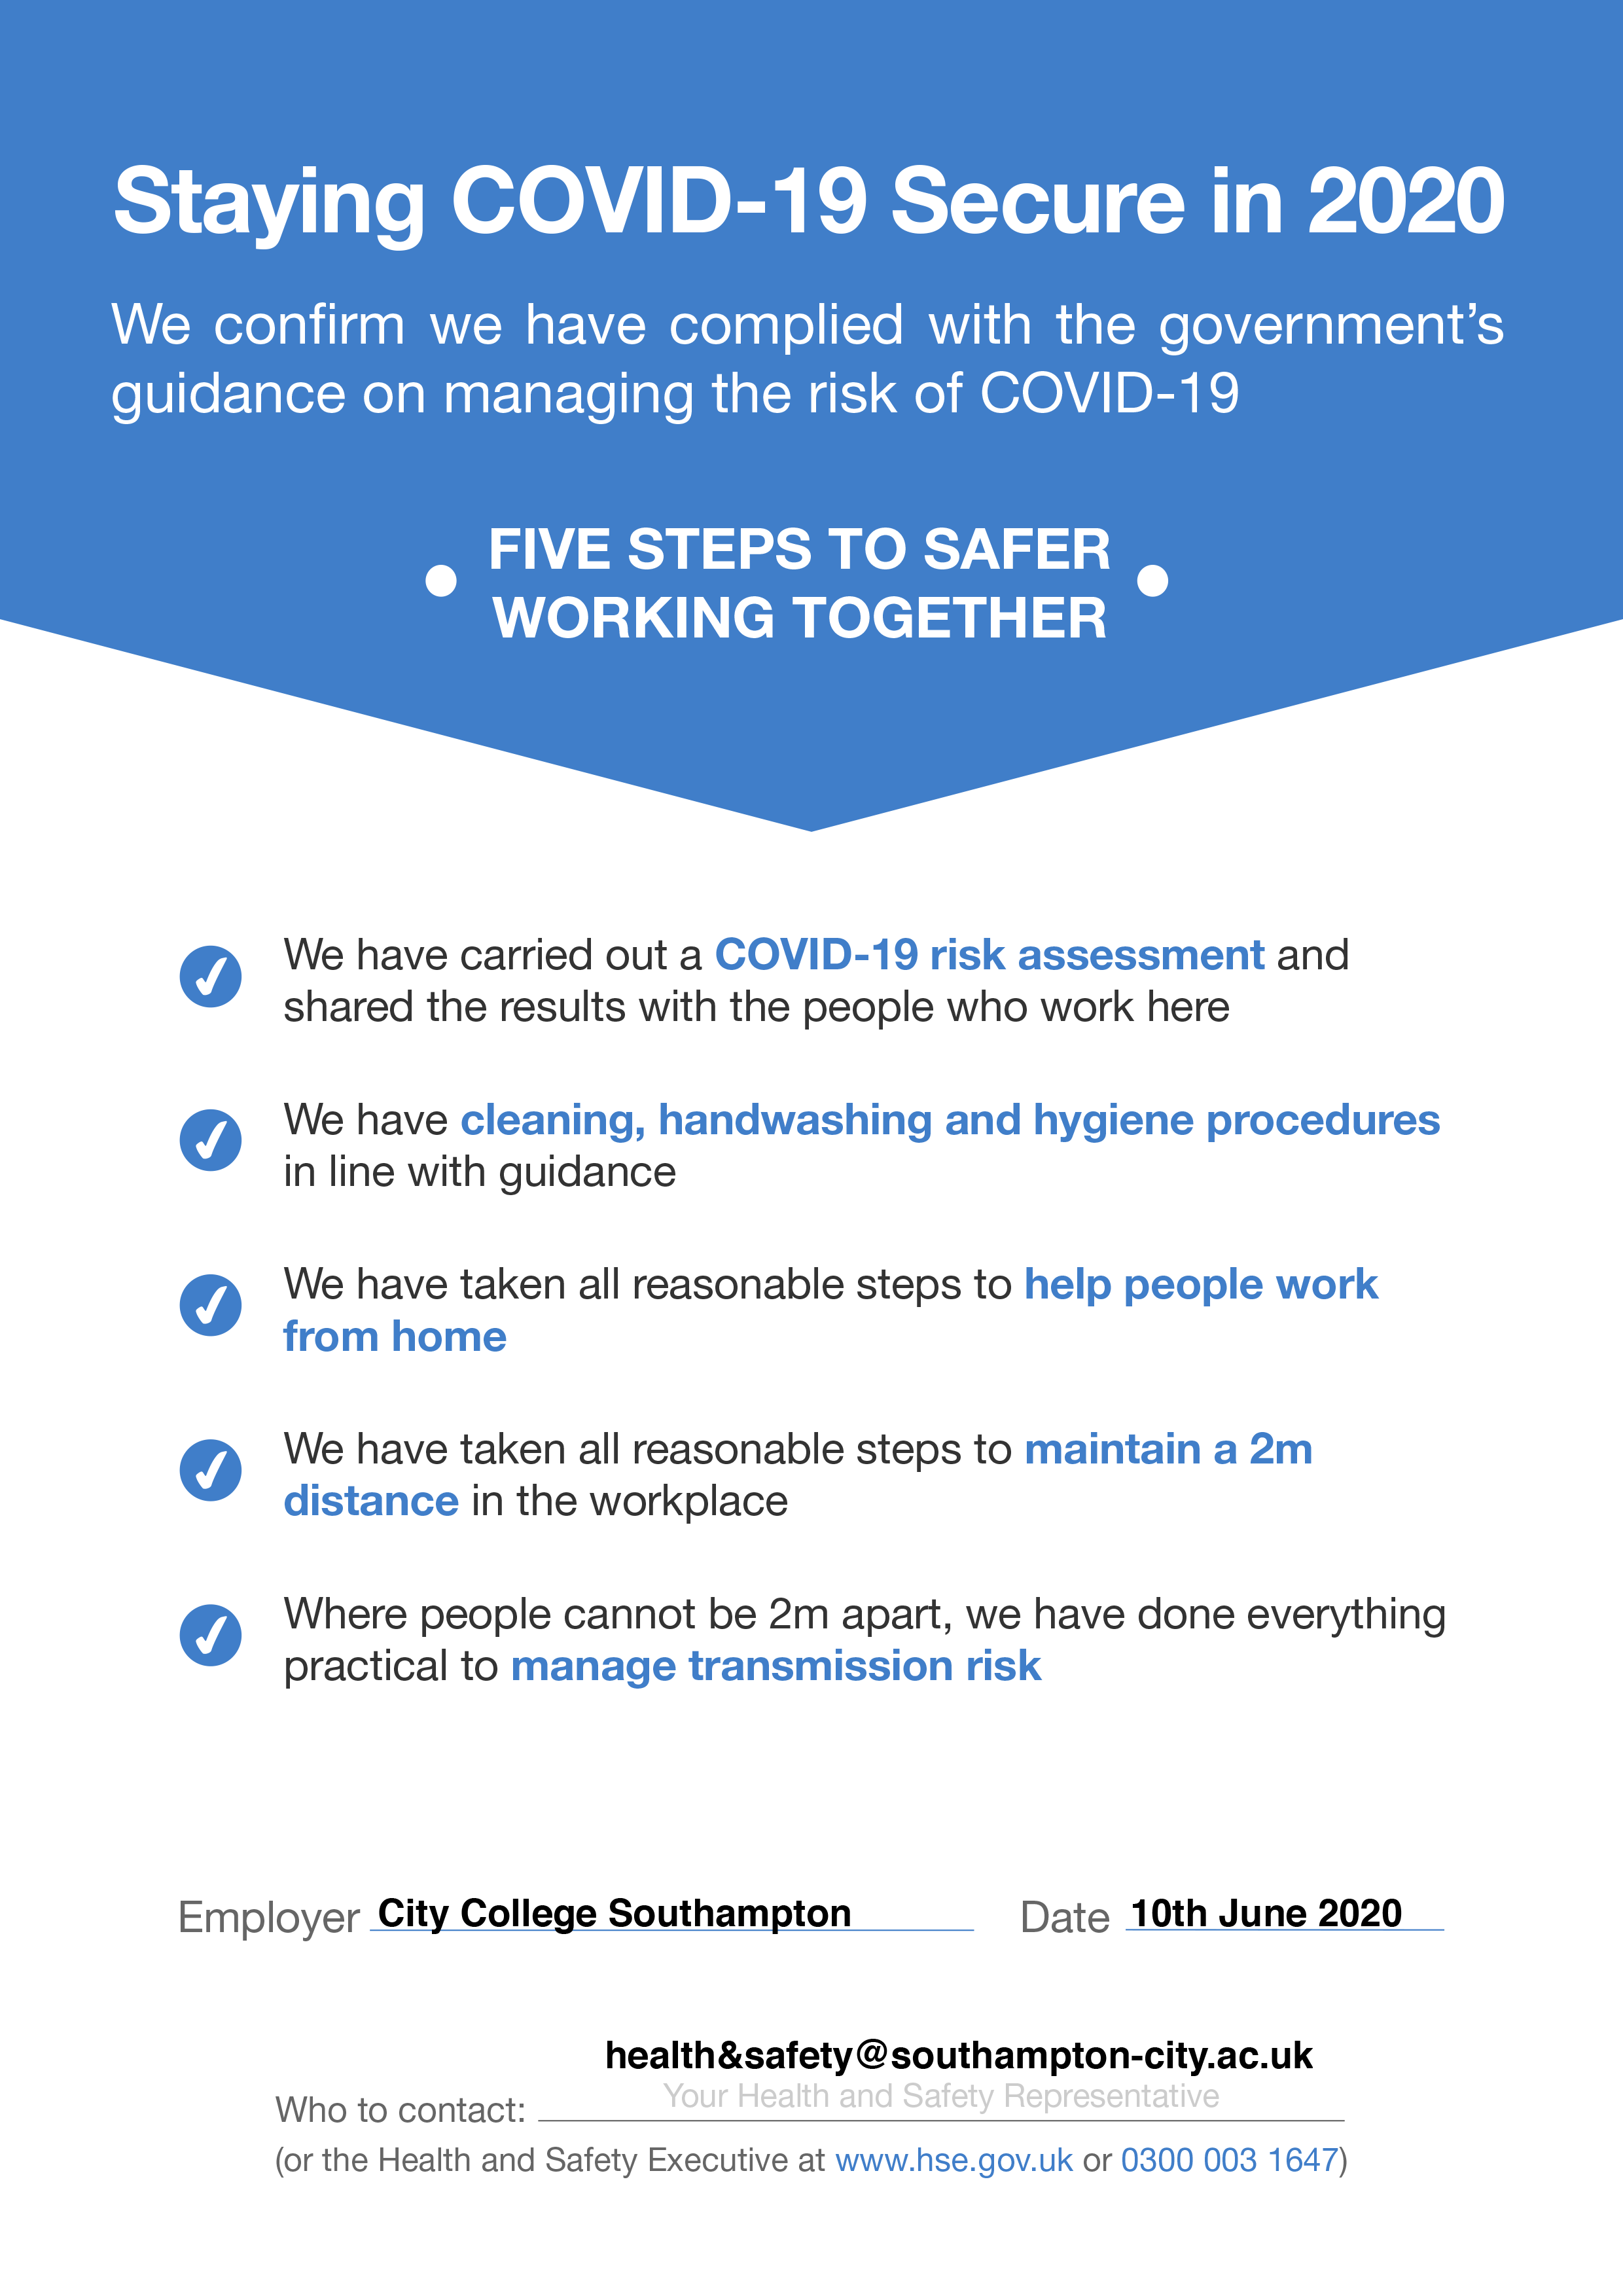 Staying Covid-19 secure statement